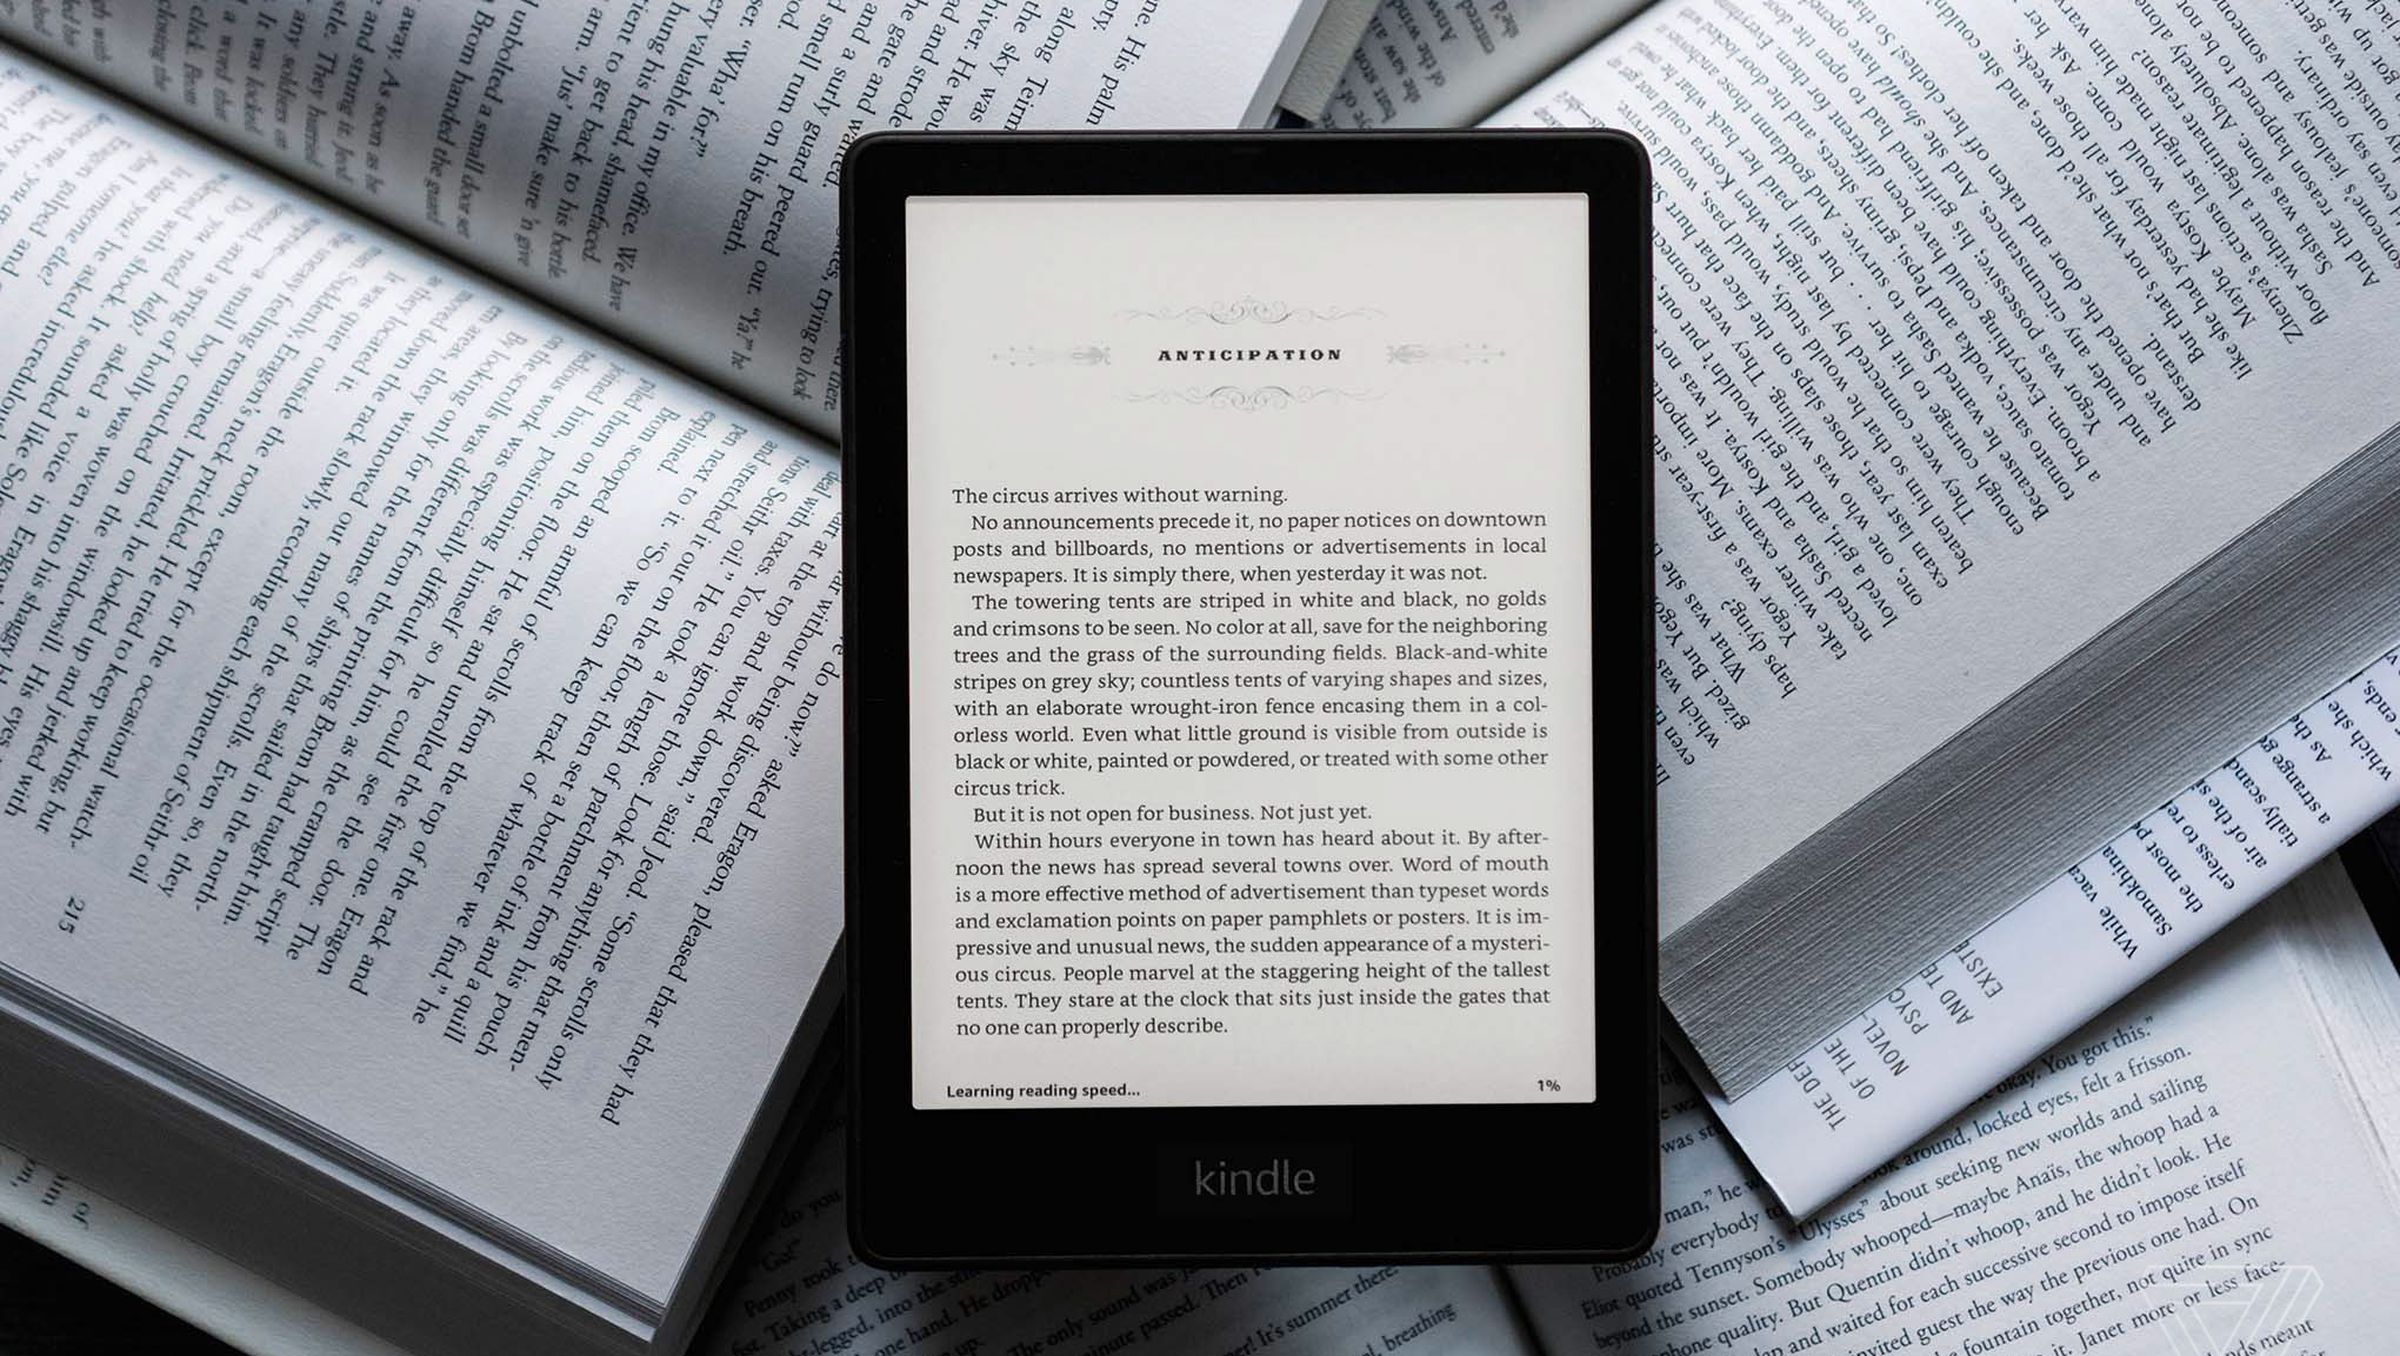 Kindle Paperwhite (2021) review: a bigger and better book - The Verge